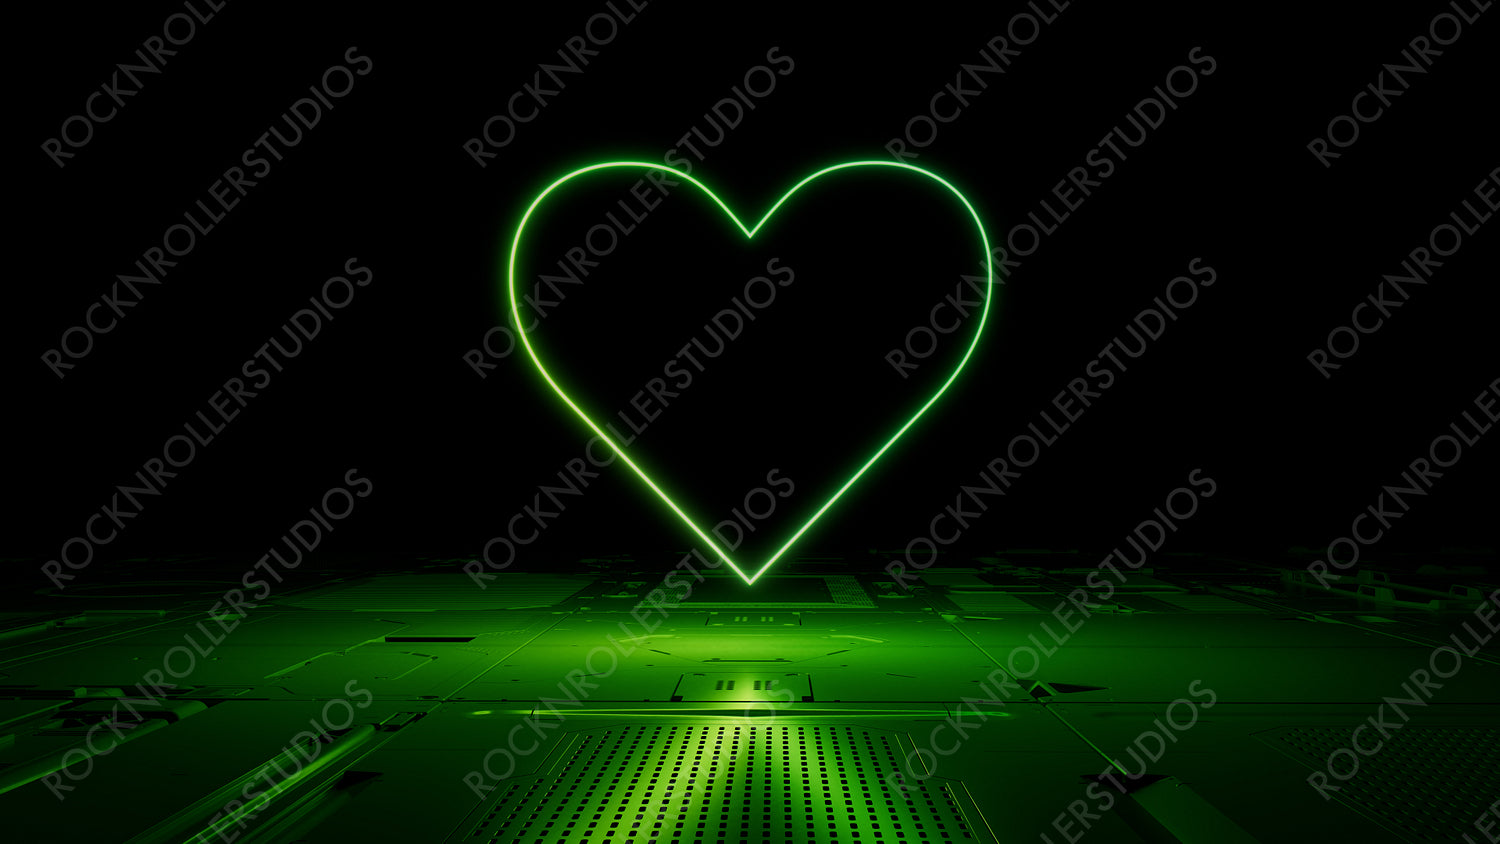 Green neon light heart icon. Vibrant colored Love technology symbol, on a black background with high tech floor. 3D Render